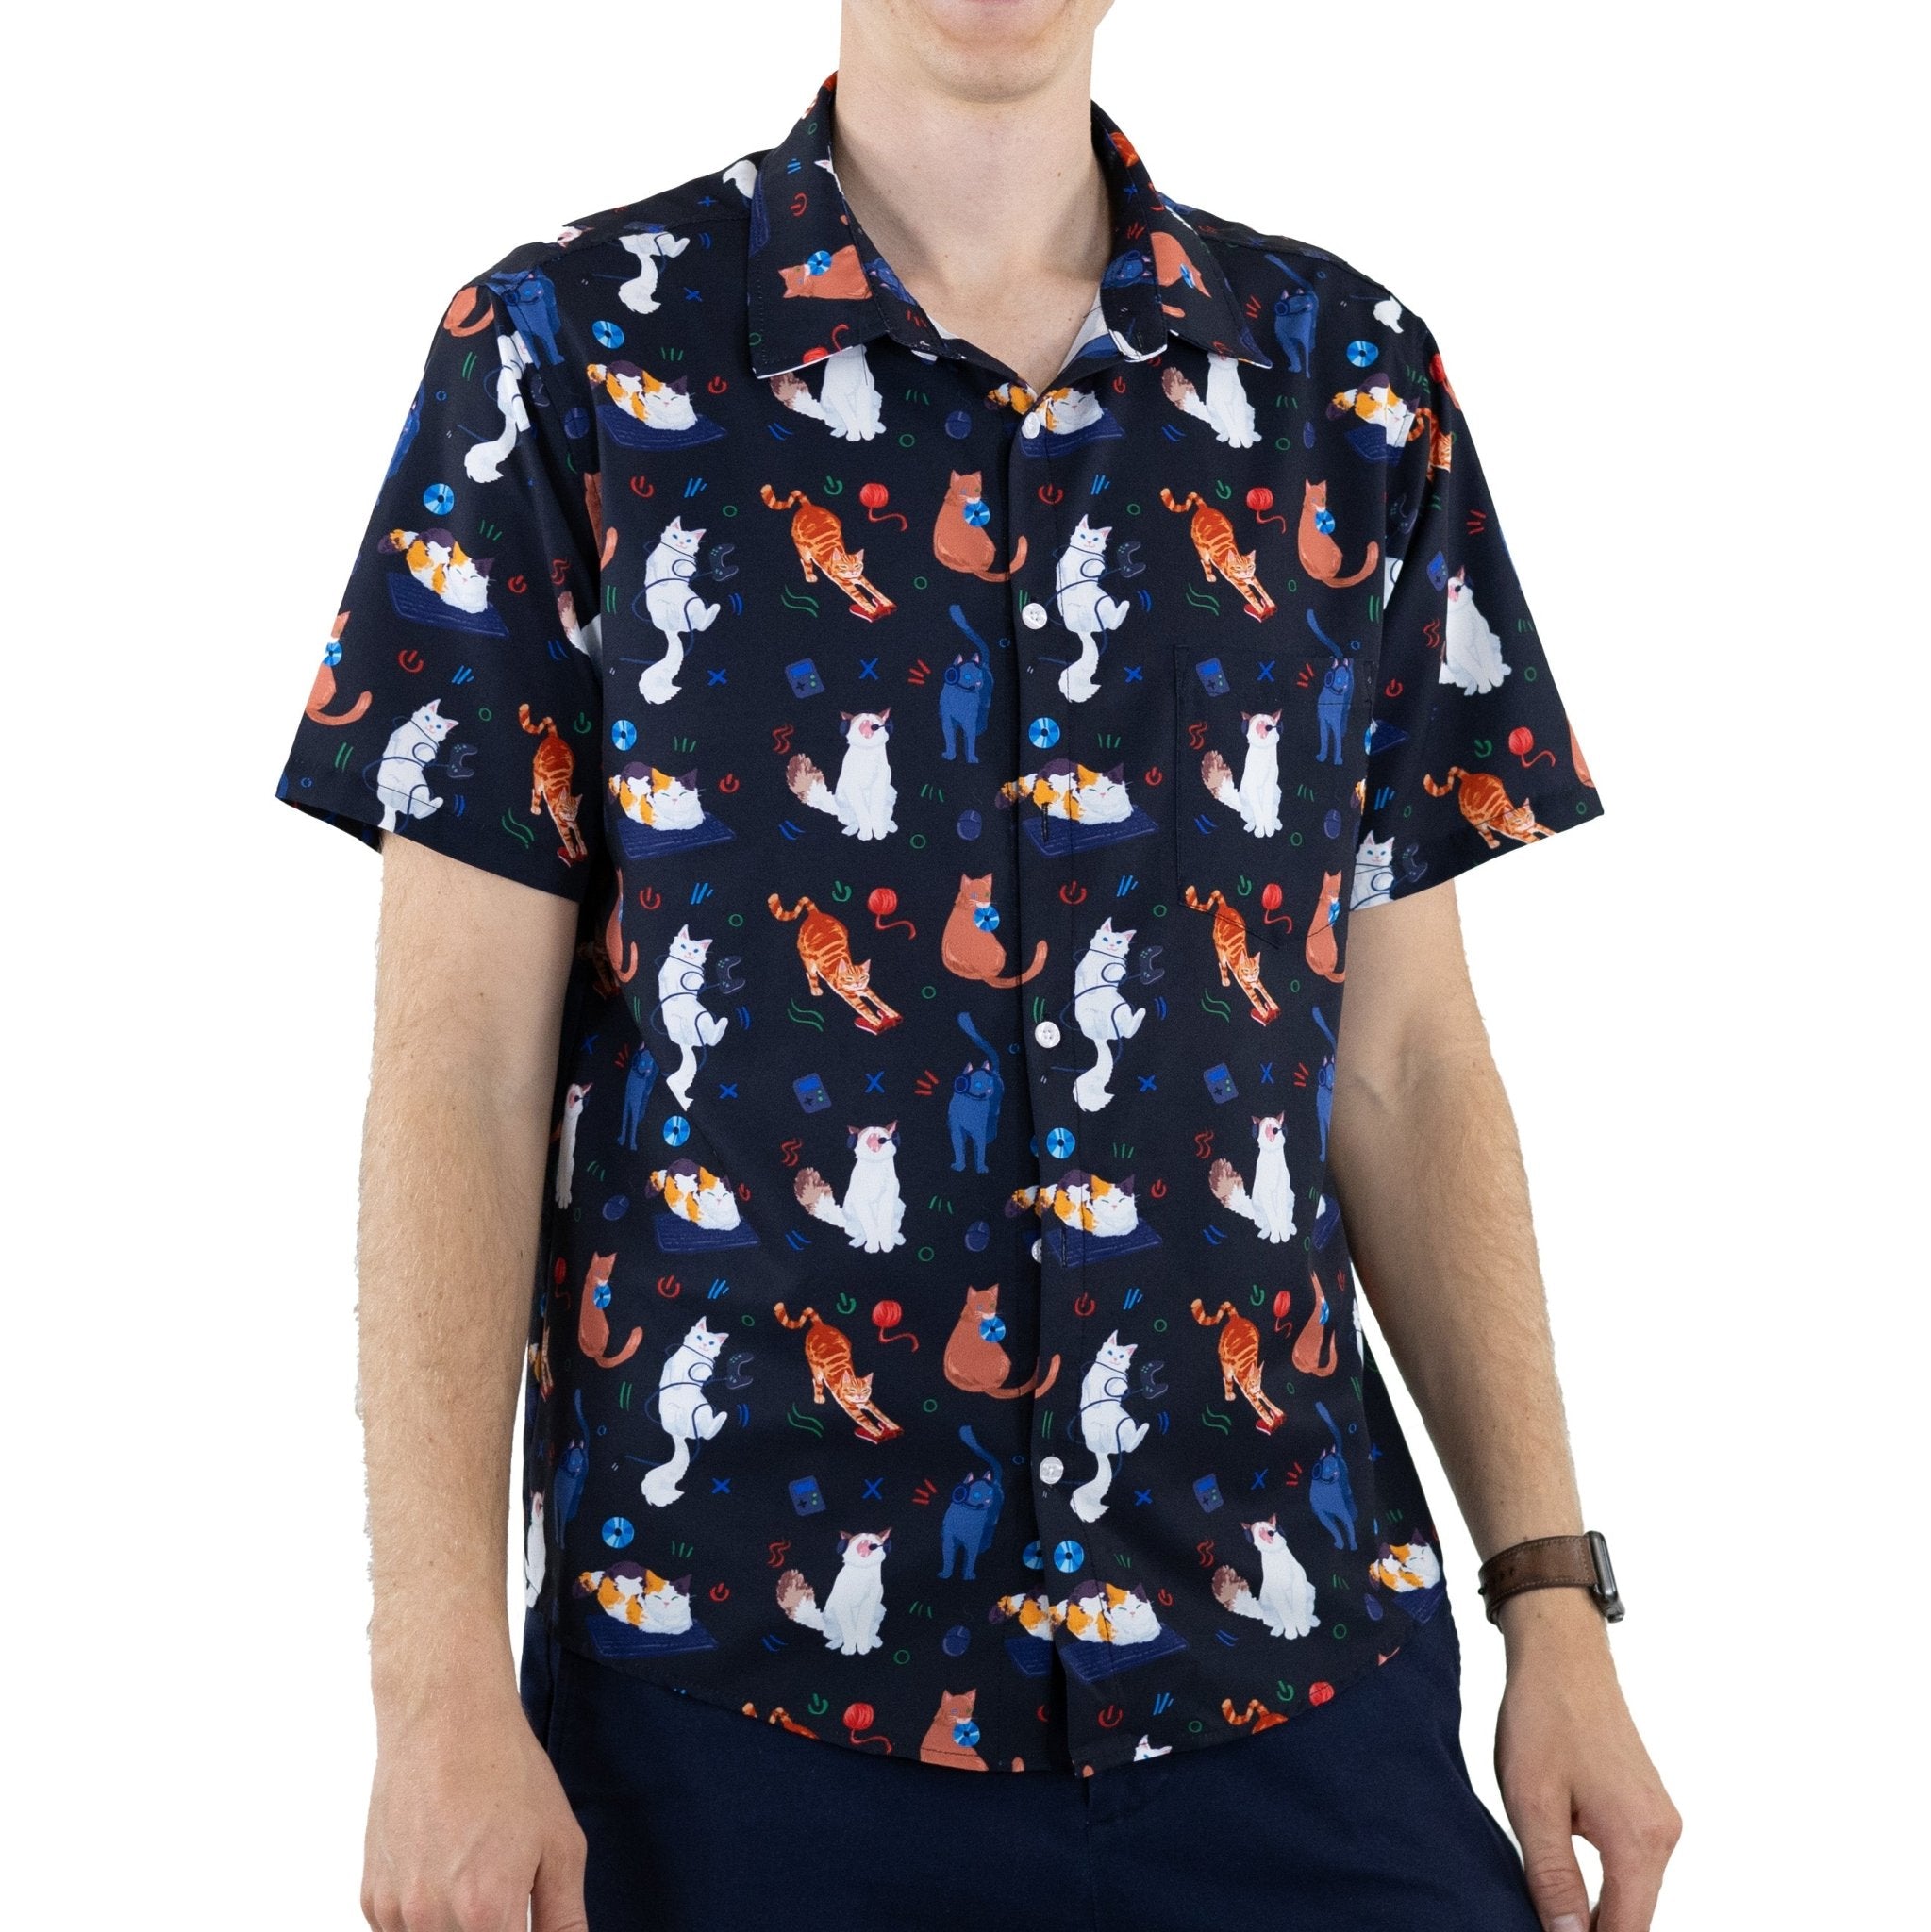 Ready-to-Ship Video Game Cats Dark Button Up Shirt - adult sizing - Animal Patterns - Design by Claire Murphy